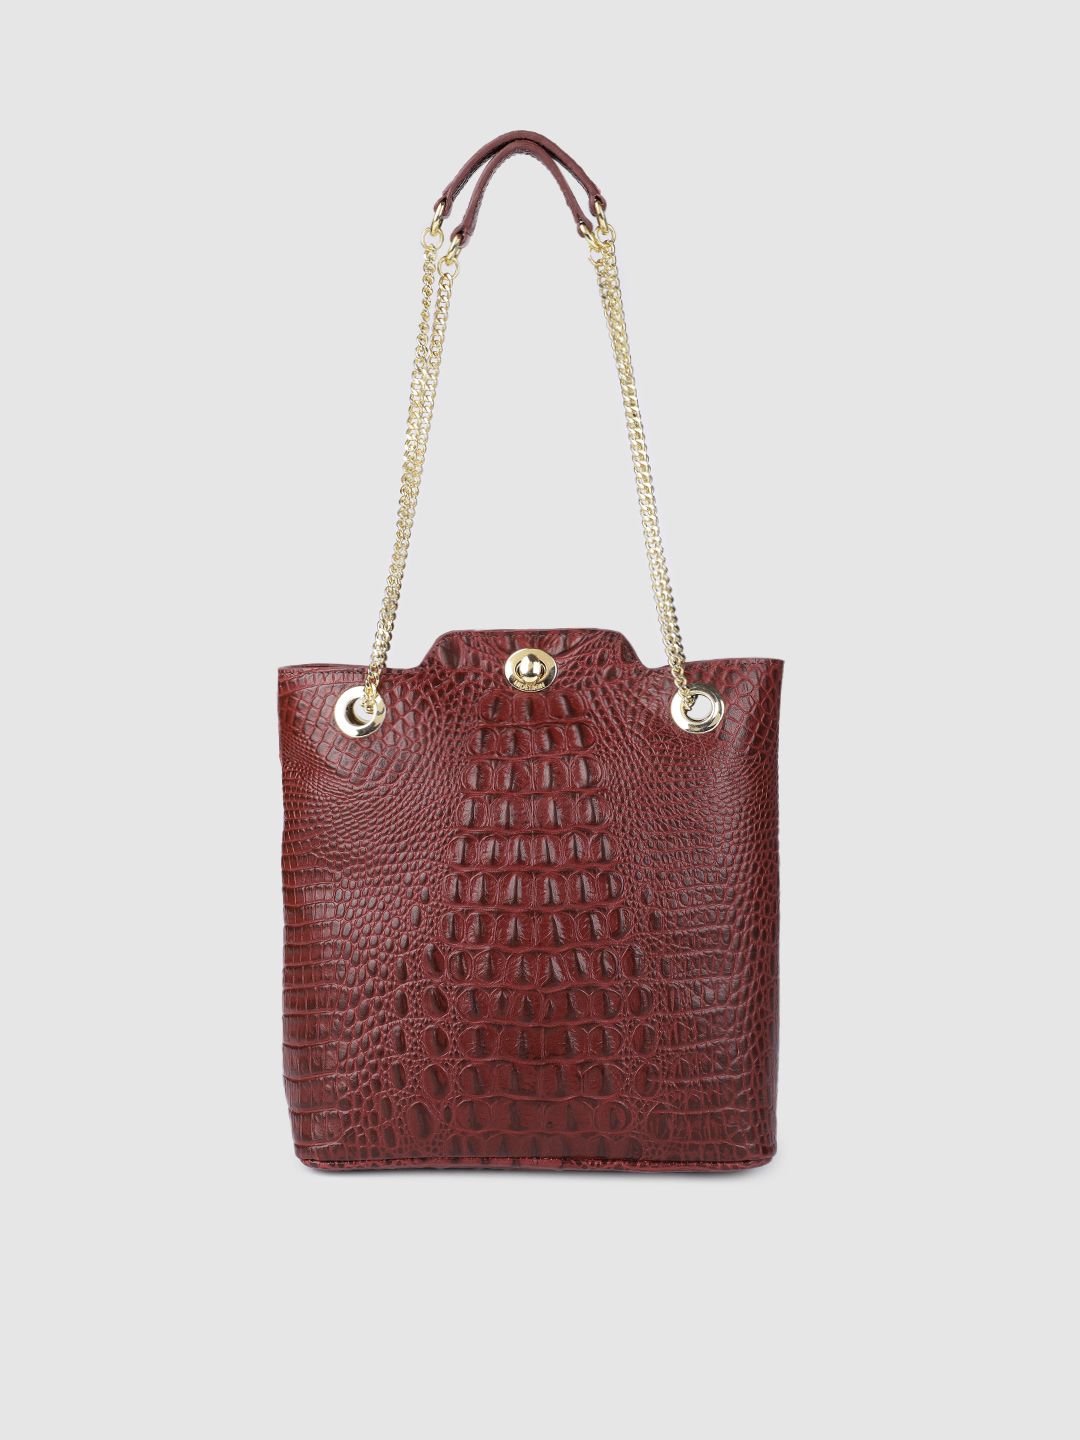 Hidesign Red Textured Leather Shoulder Bag Price in India